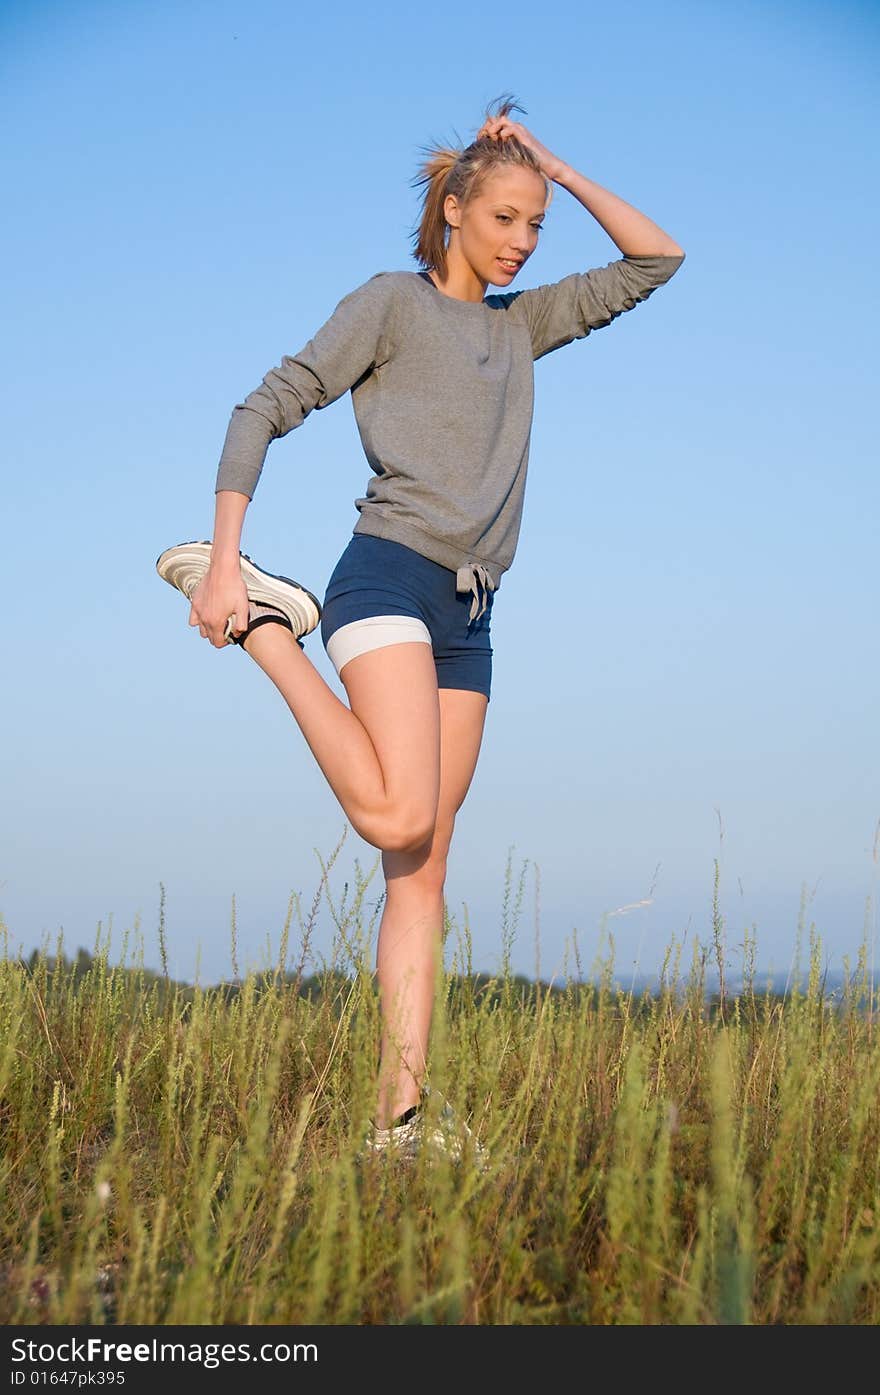 Athletics young woman stretching in a hilly meadow.